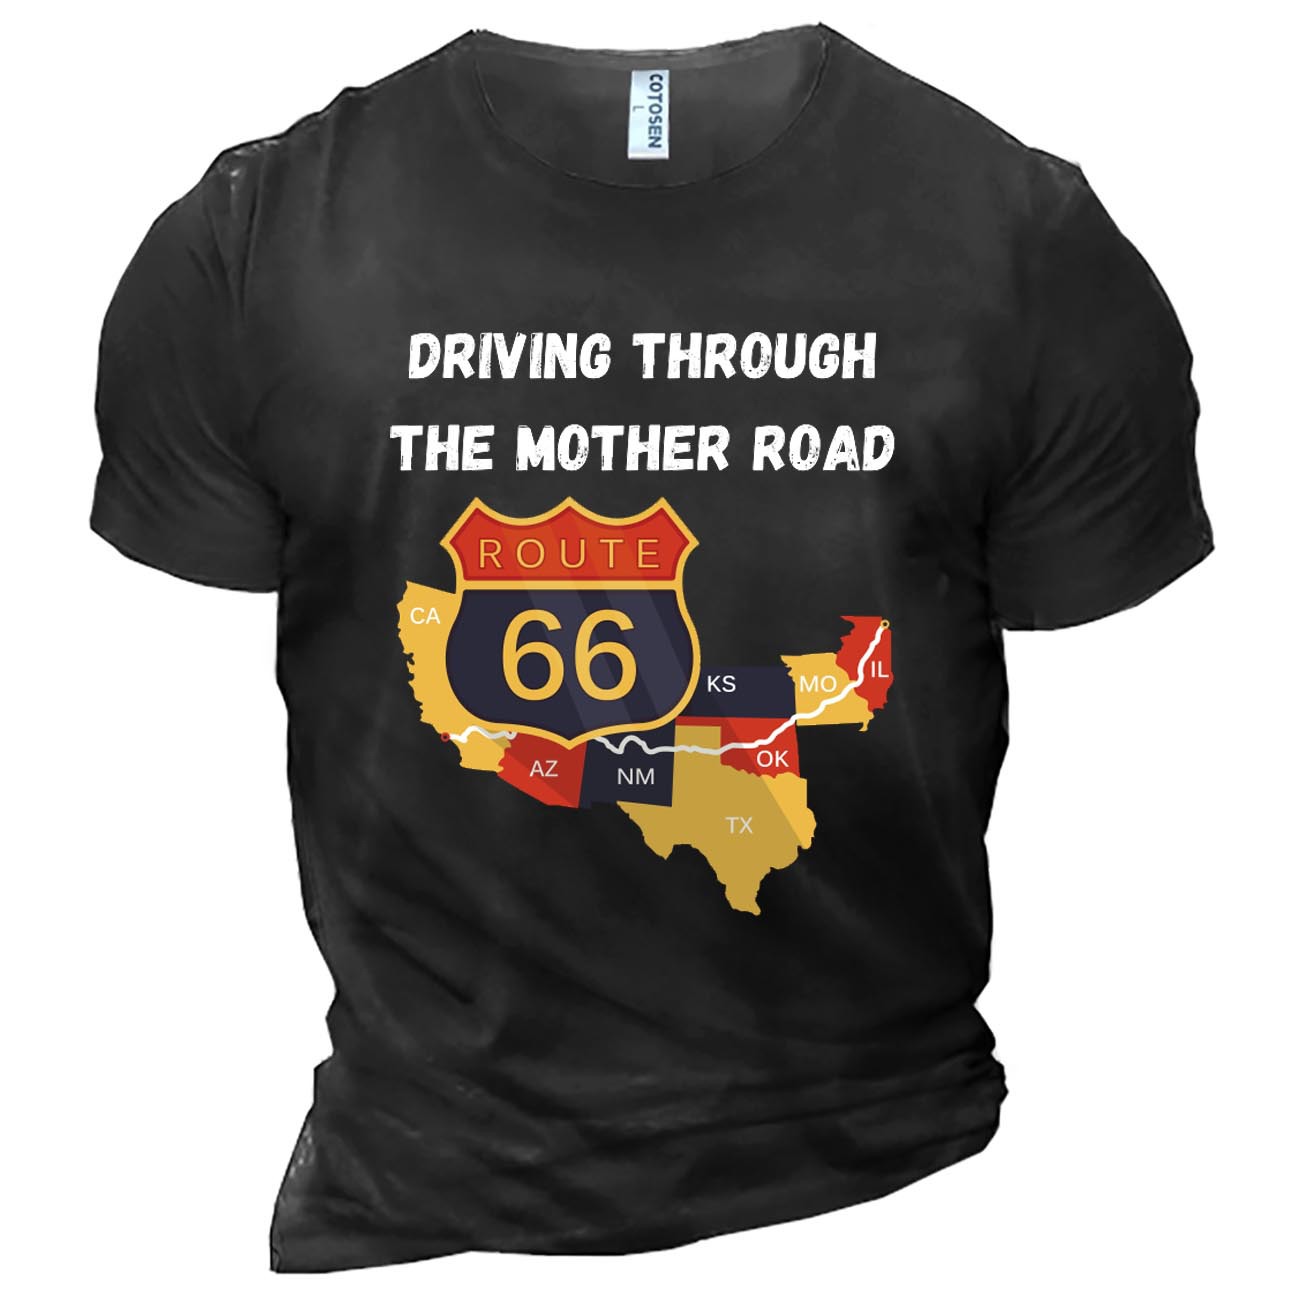 Men's Driving Through The Chic Mother Road Route 66 Cotton T-shirt